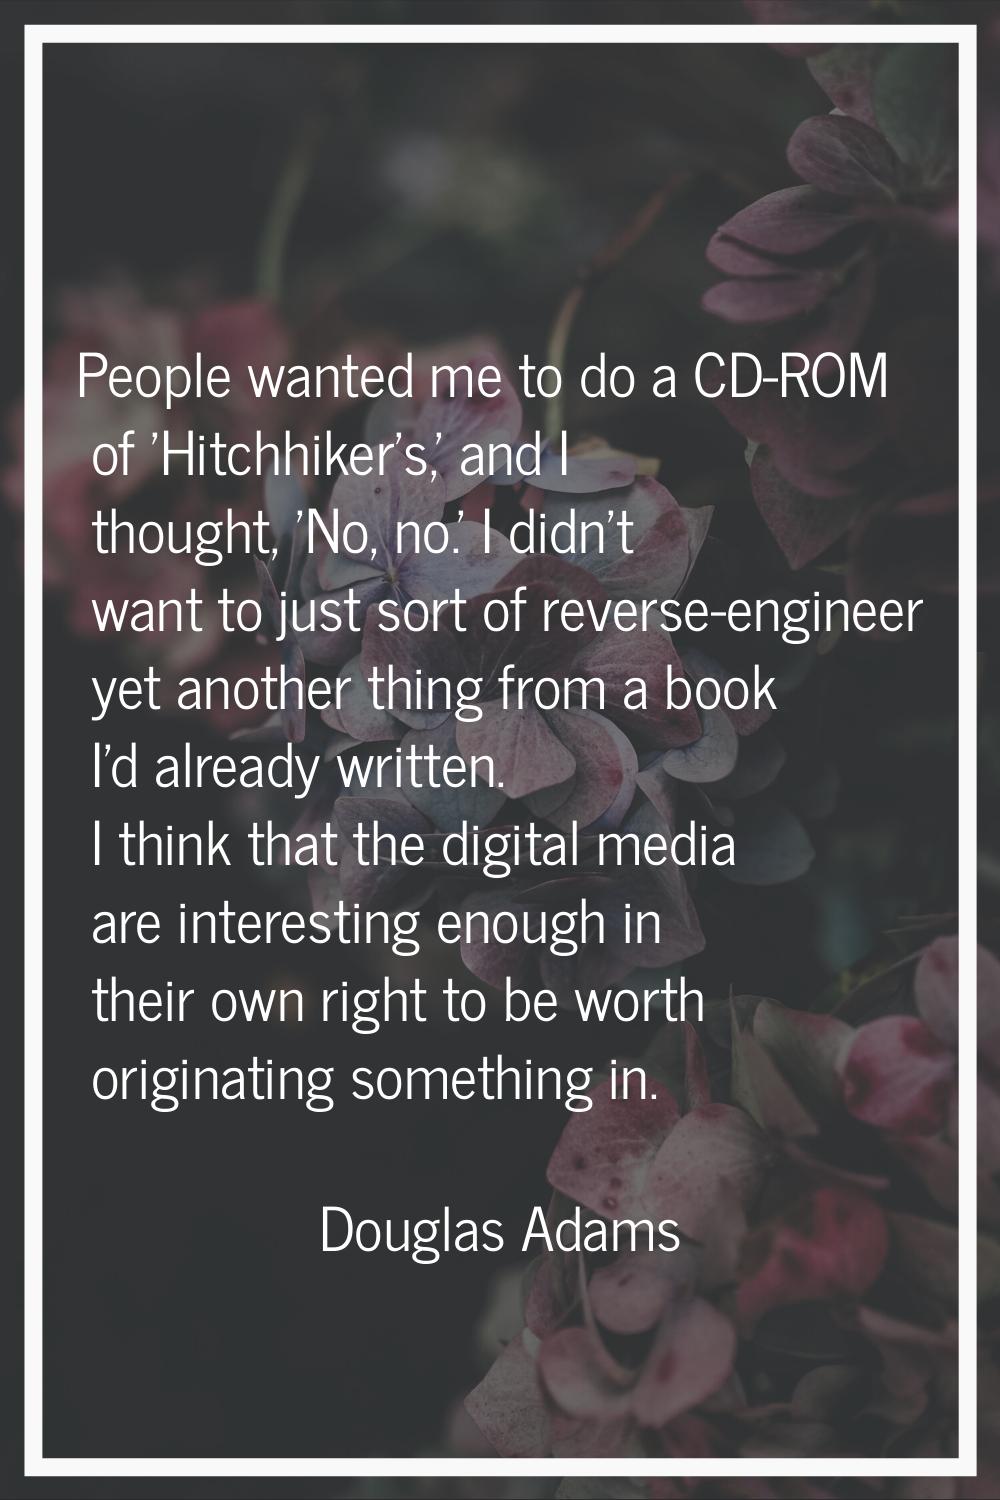 People wanted me to do a CD-ROM of 'Hitchhiker's,' and I thought, 'No, no.' I didn't want to just s